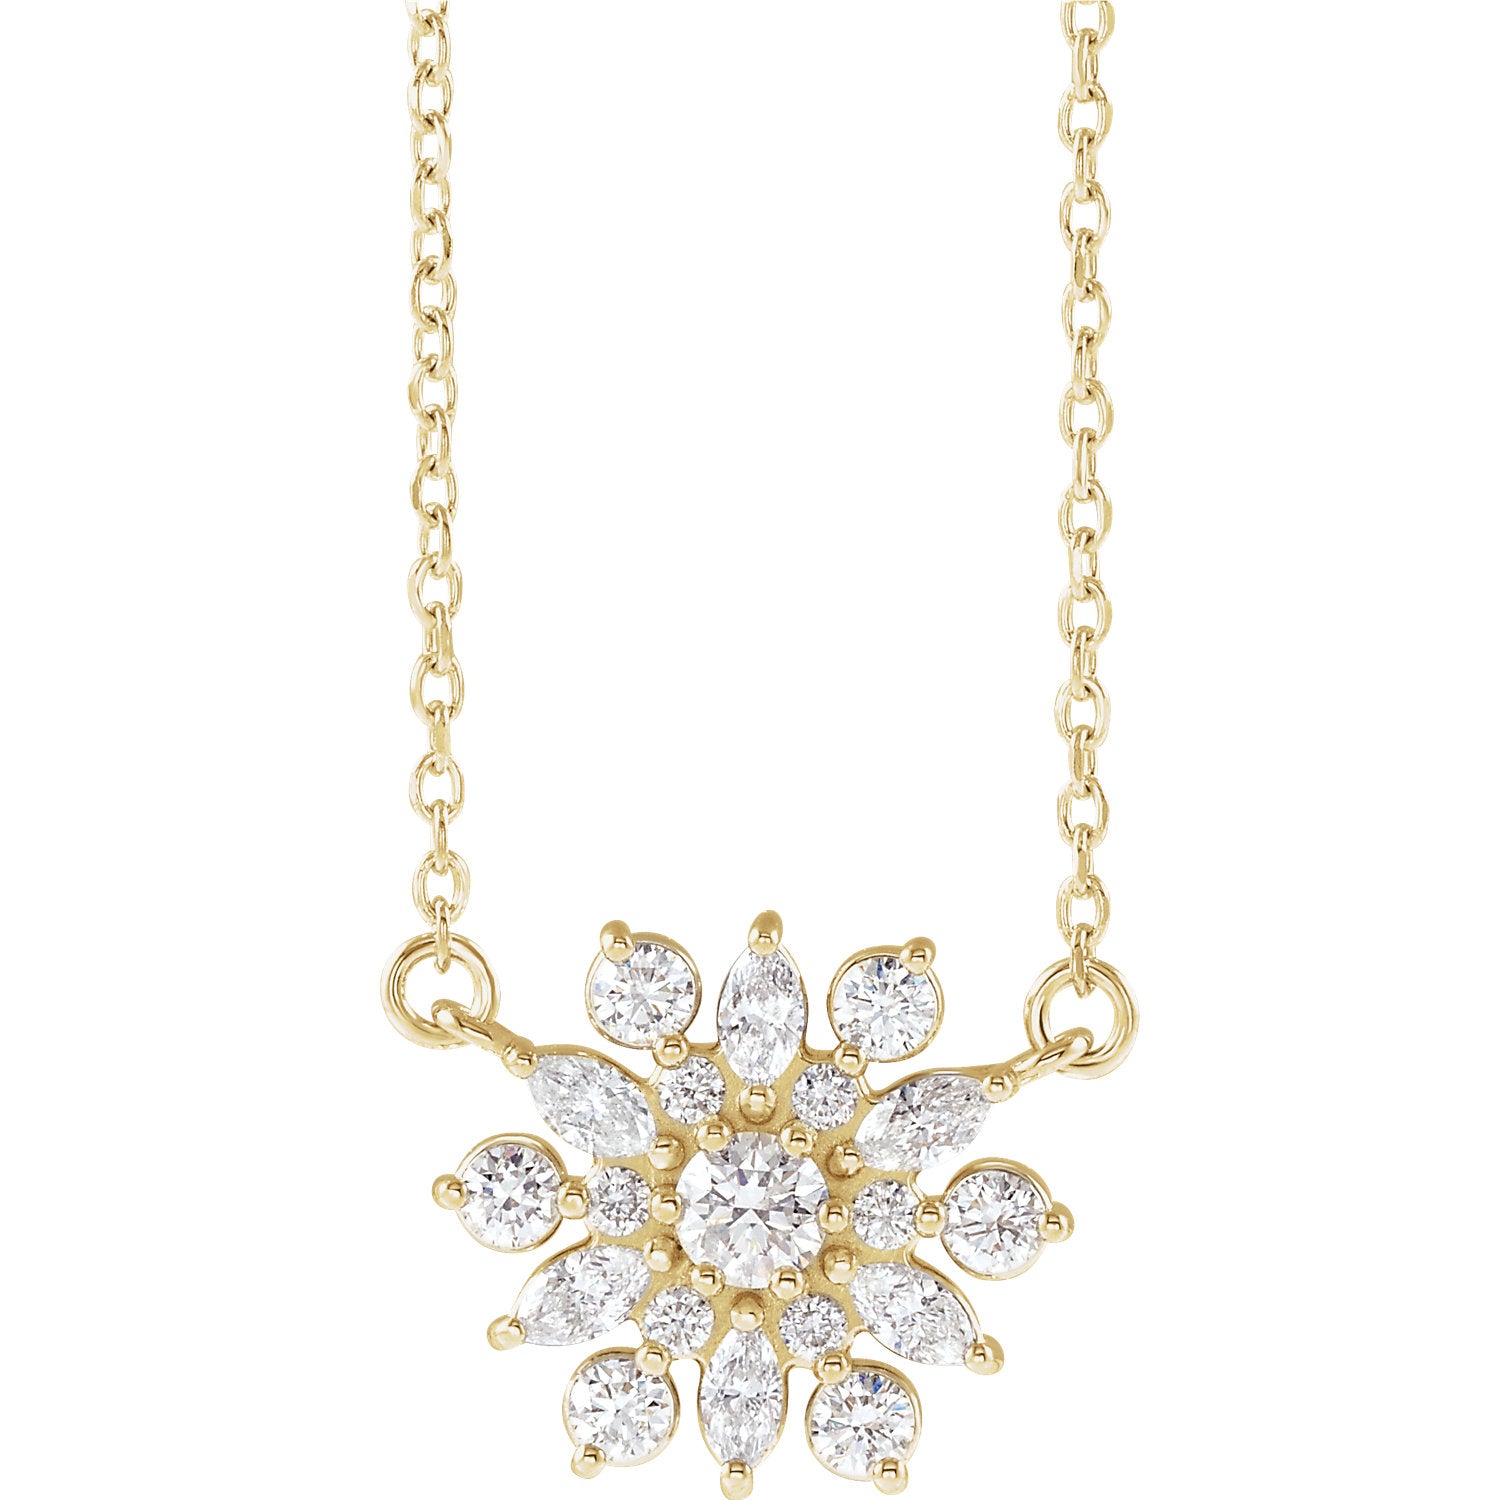 1/2 CTW Diamond Vintage-Inspired 16" Necklace - 14k Gold (Y, W or R), or Platinum, Sterling Silver